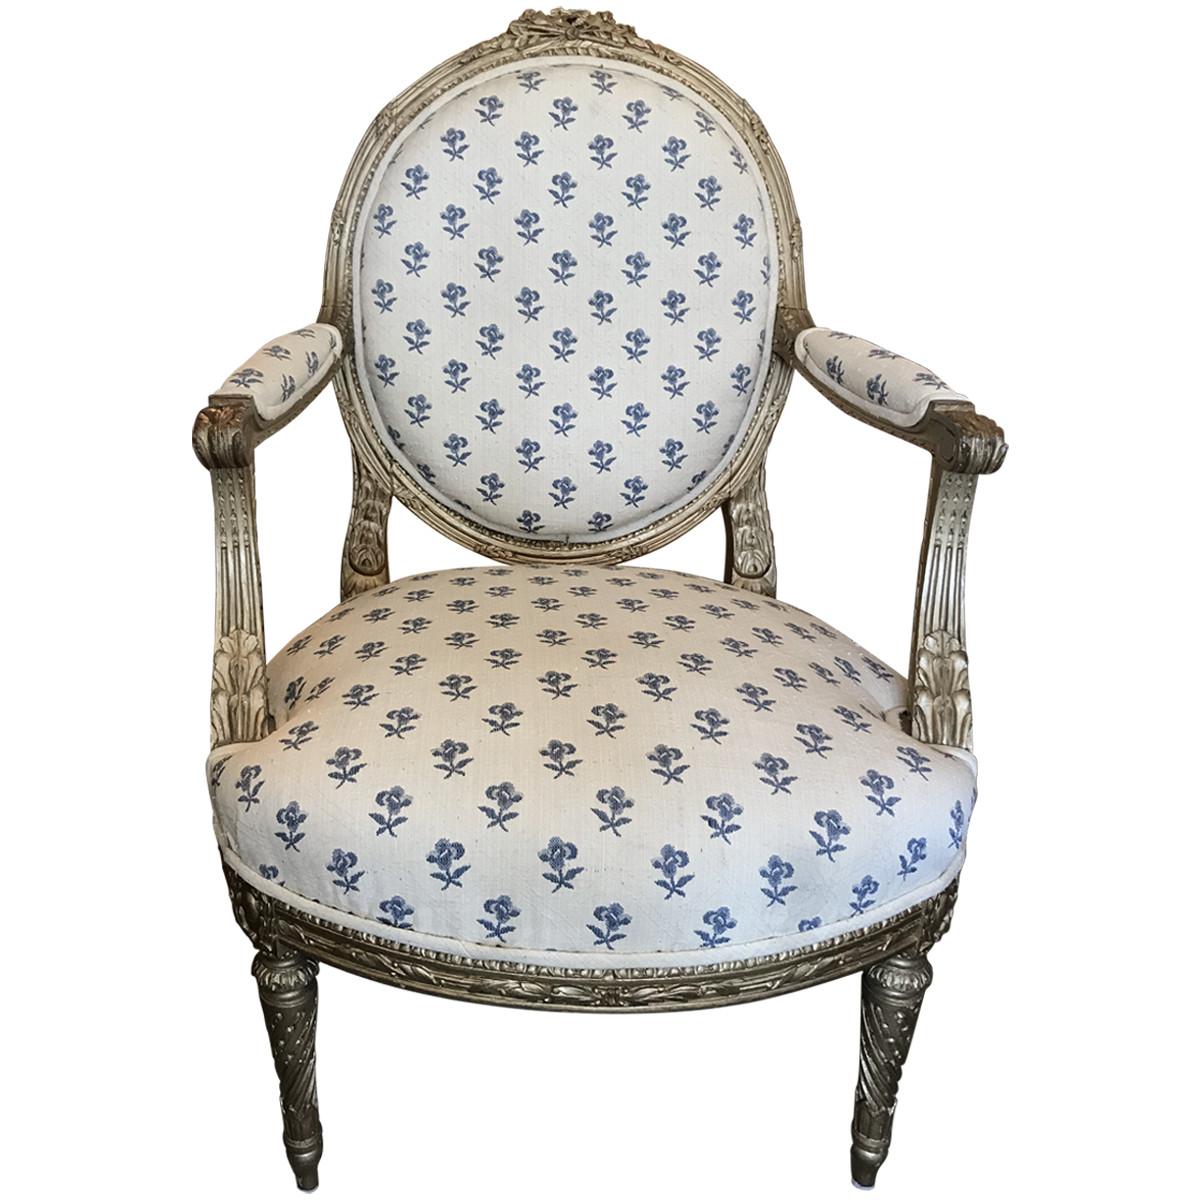 A collectible piece from bygone days, featuring the finest craftsmanship, materials, and design elements of its given era. Dating to the 19th century, these giltwood fauteuils are designed in the French Louis XVI style. They are made with oval